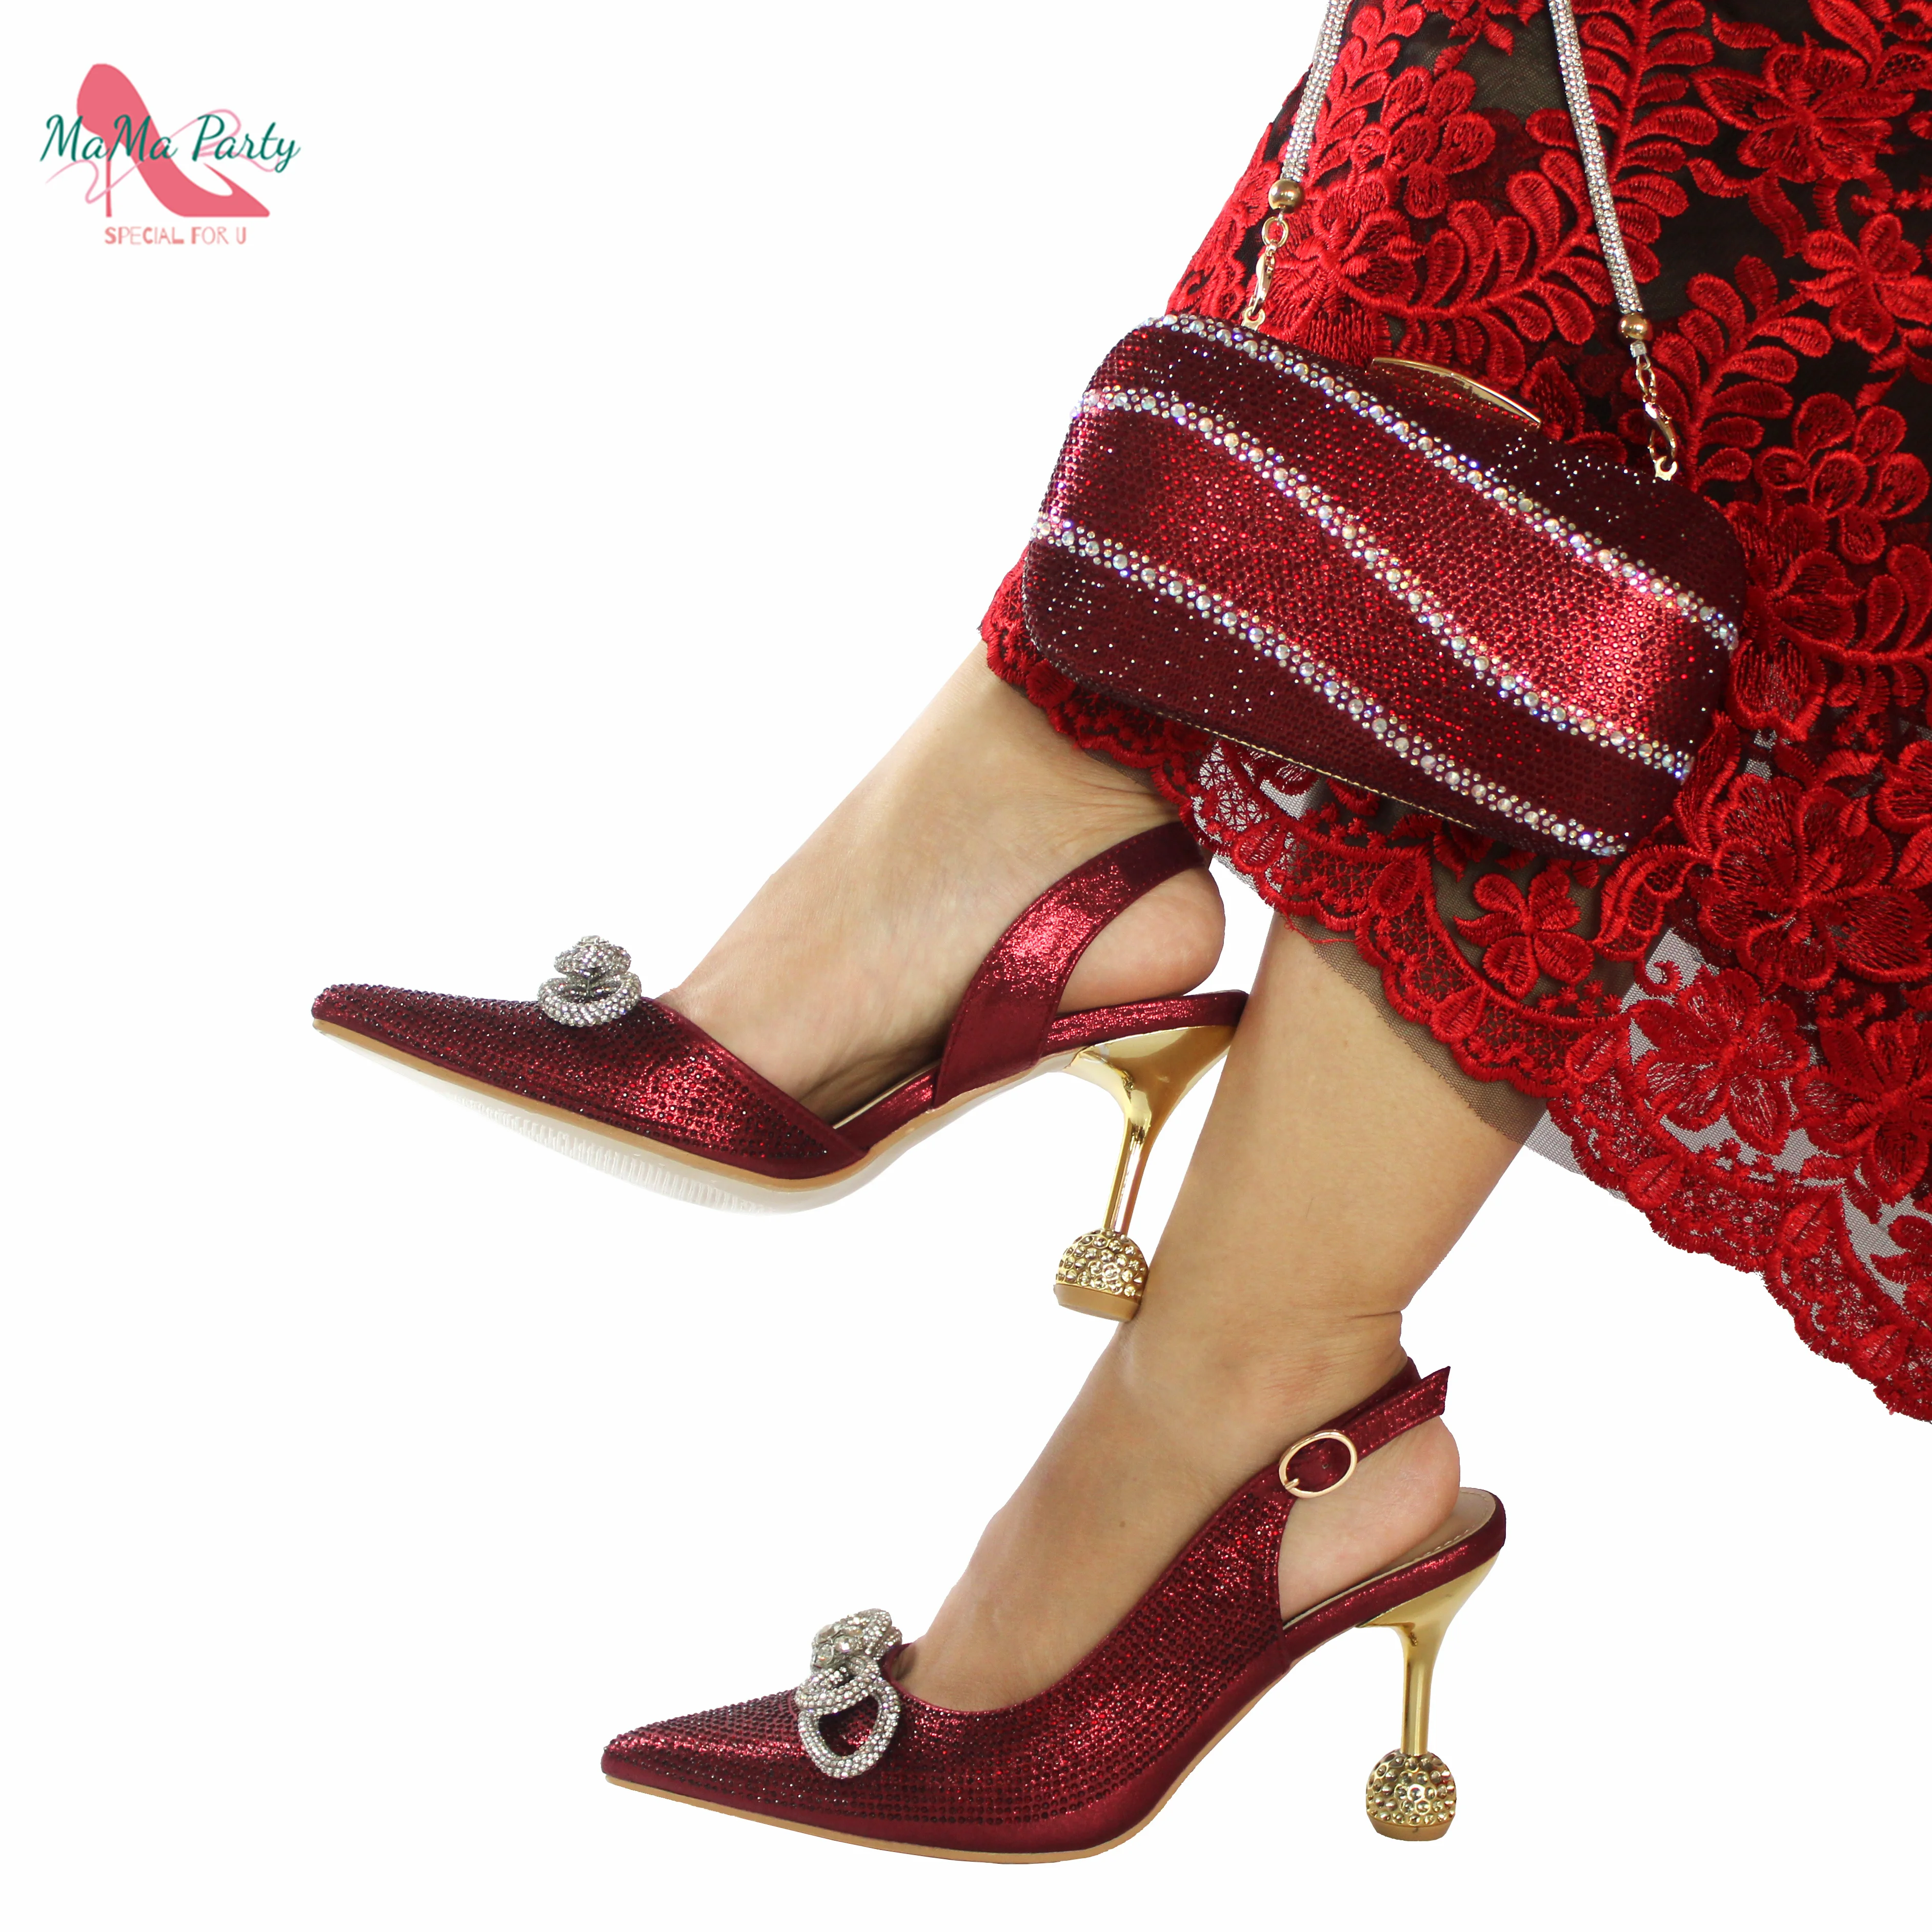 

2022 New Arrive Fashionable Peep Toe Shoes Matching Bag in Wine Color For Nigerian Women Wedding Party